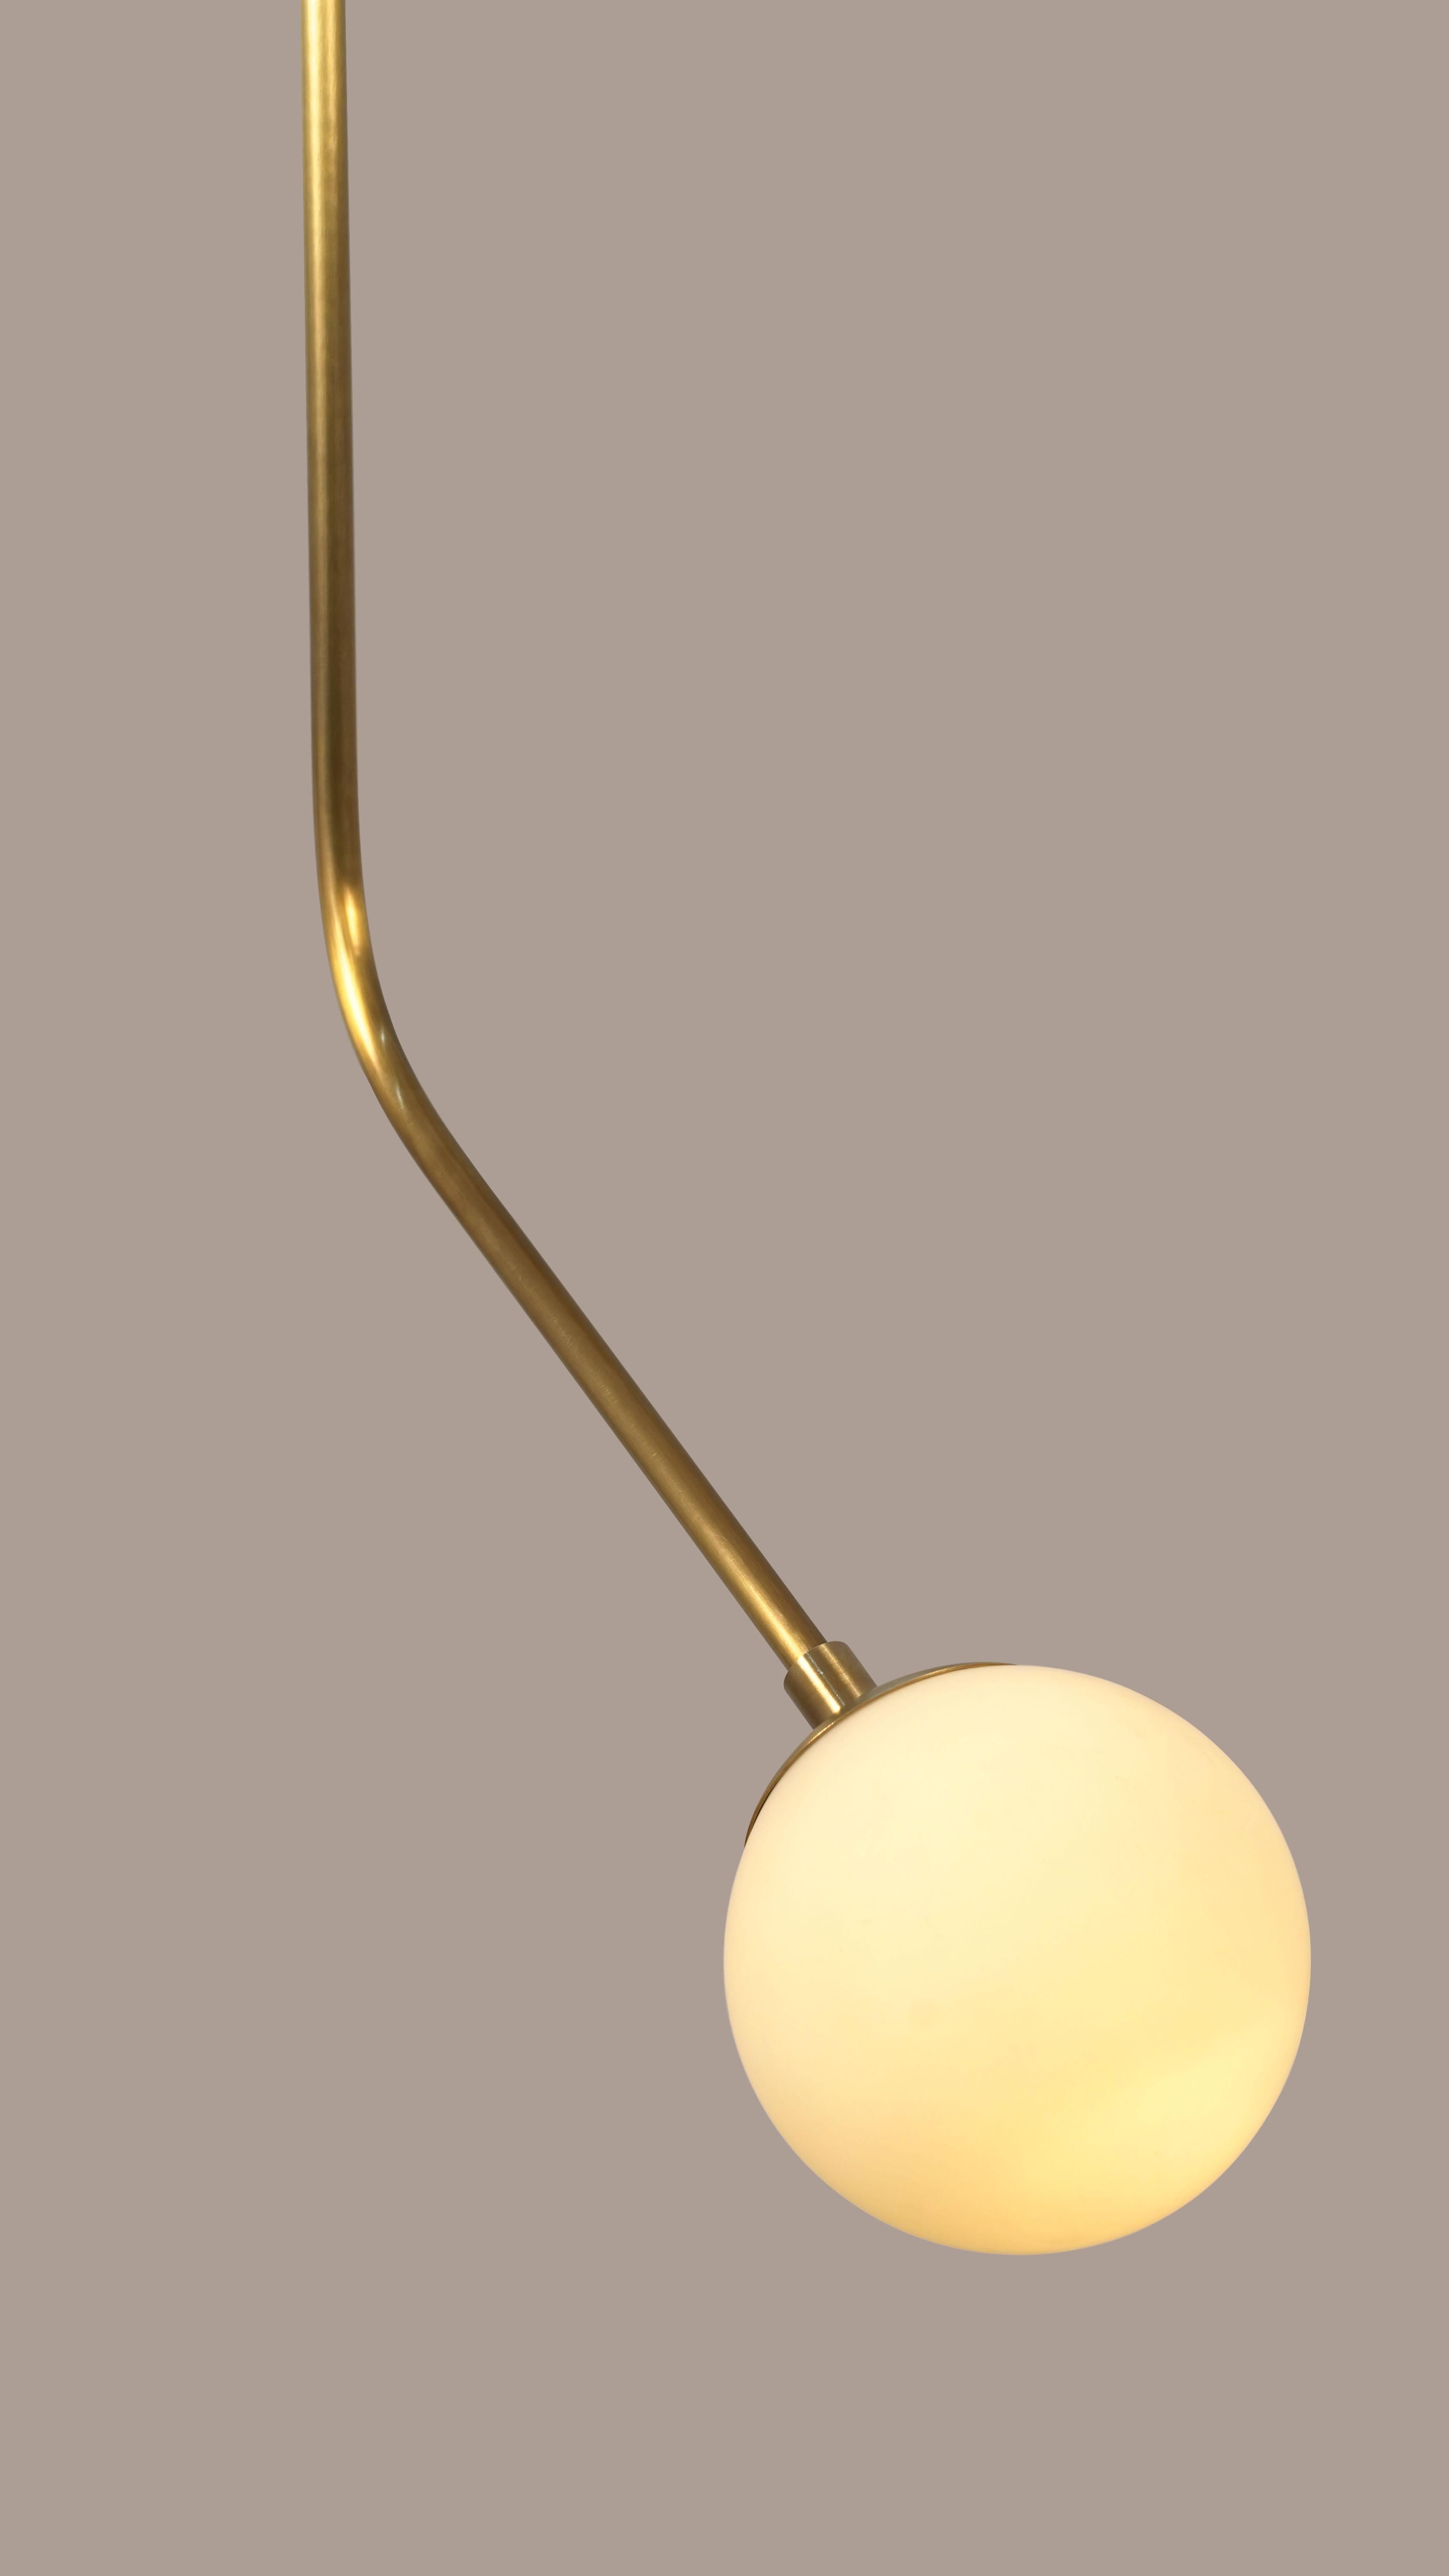 Rhythm 2 Glass Globe Pendant Lamp by Lamp Shaper
Dimensions: D 43 x W 43 x H 114.5 cm.
Materials: Brass and glass.

Different finishes available: raw brass, aged brass, burnt brass and brushed brass Please contact us.

All our lamps can be wired